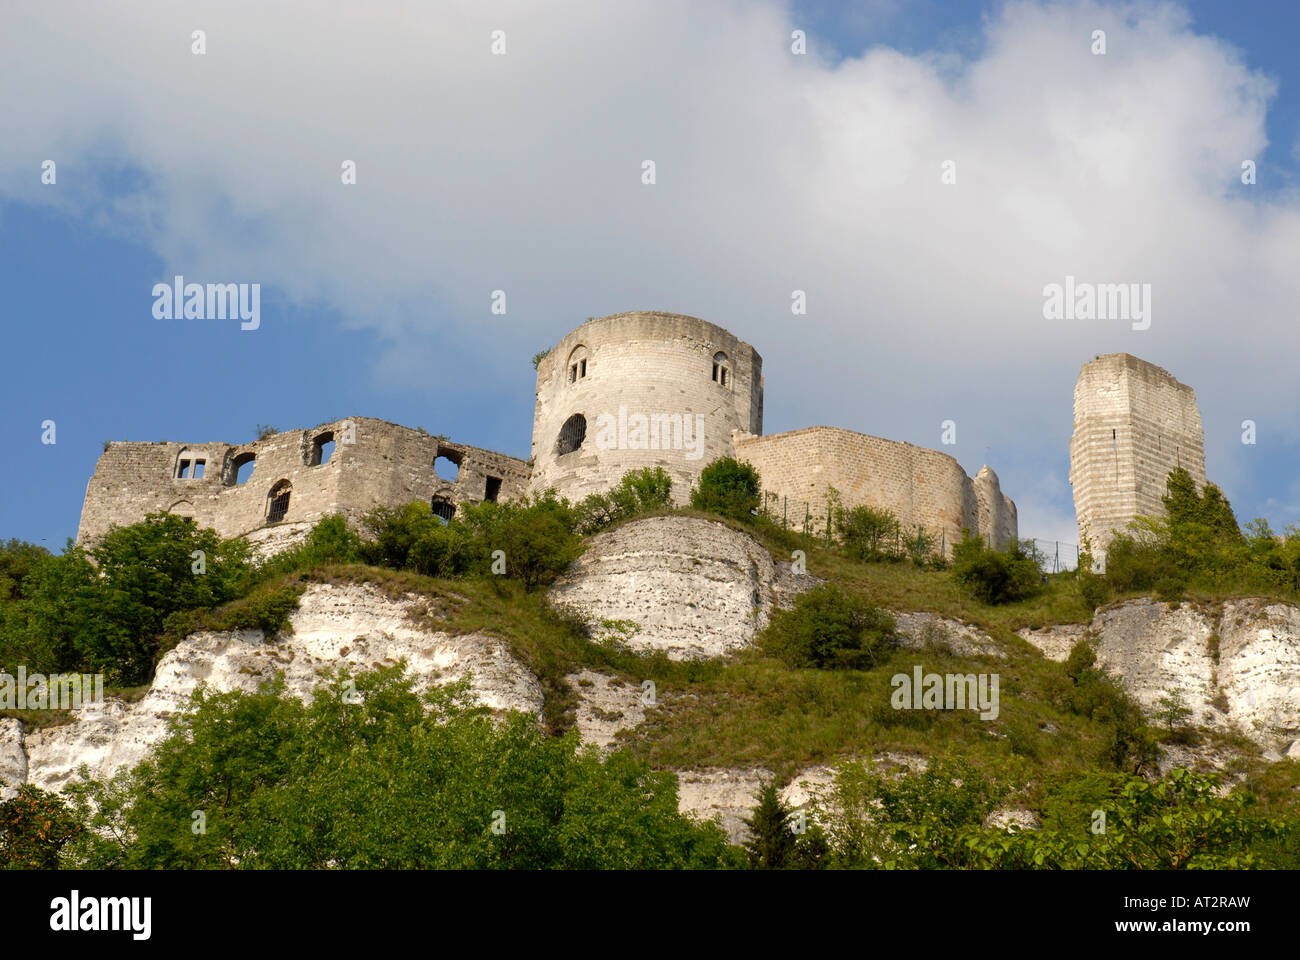 Chateau Gaillard castle at Les Andelys,Normandy, France The Stronghold of Richard the Lionheart Stock Photo